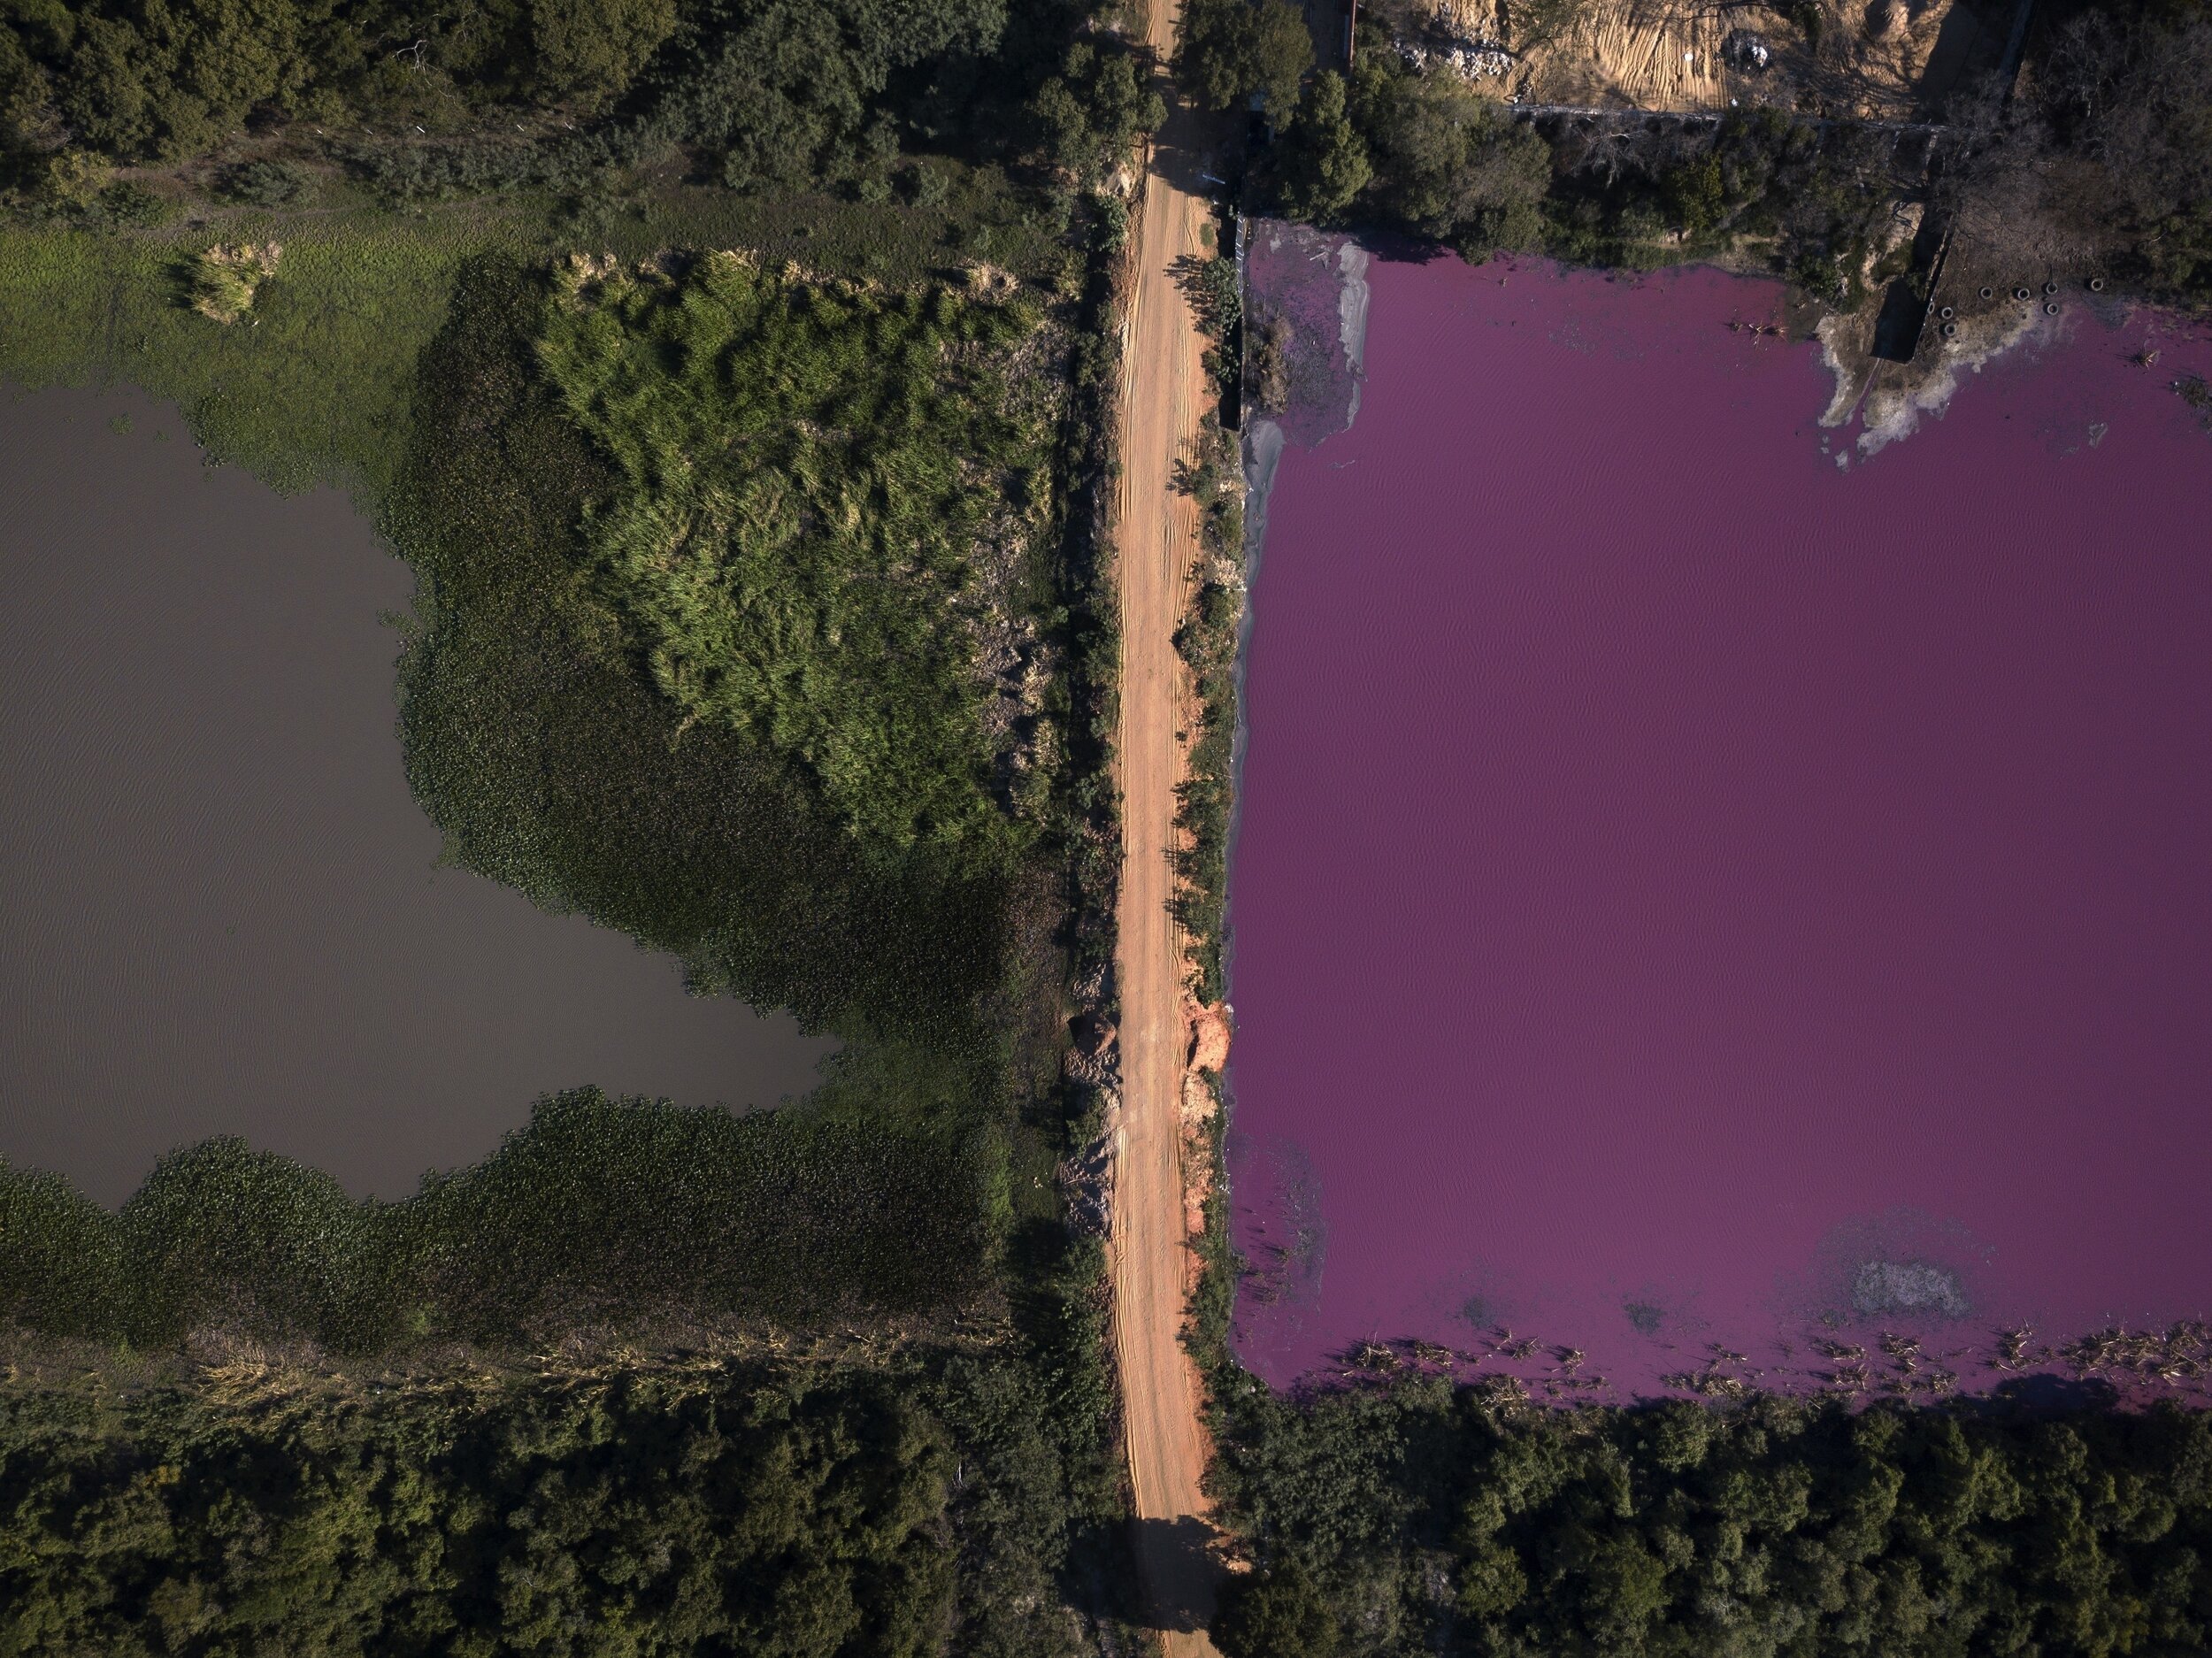  A road divides the Cerro Lagoon, where the water at right is colored under the Waltrading S.A. tannery that stands on the bank in Limpio, Paraguay, Wednesday, Aug. 5, 2020. According to Francisco Ferreira, a technician at the National University Mul